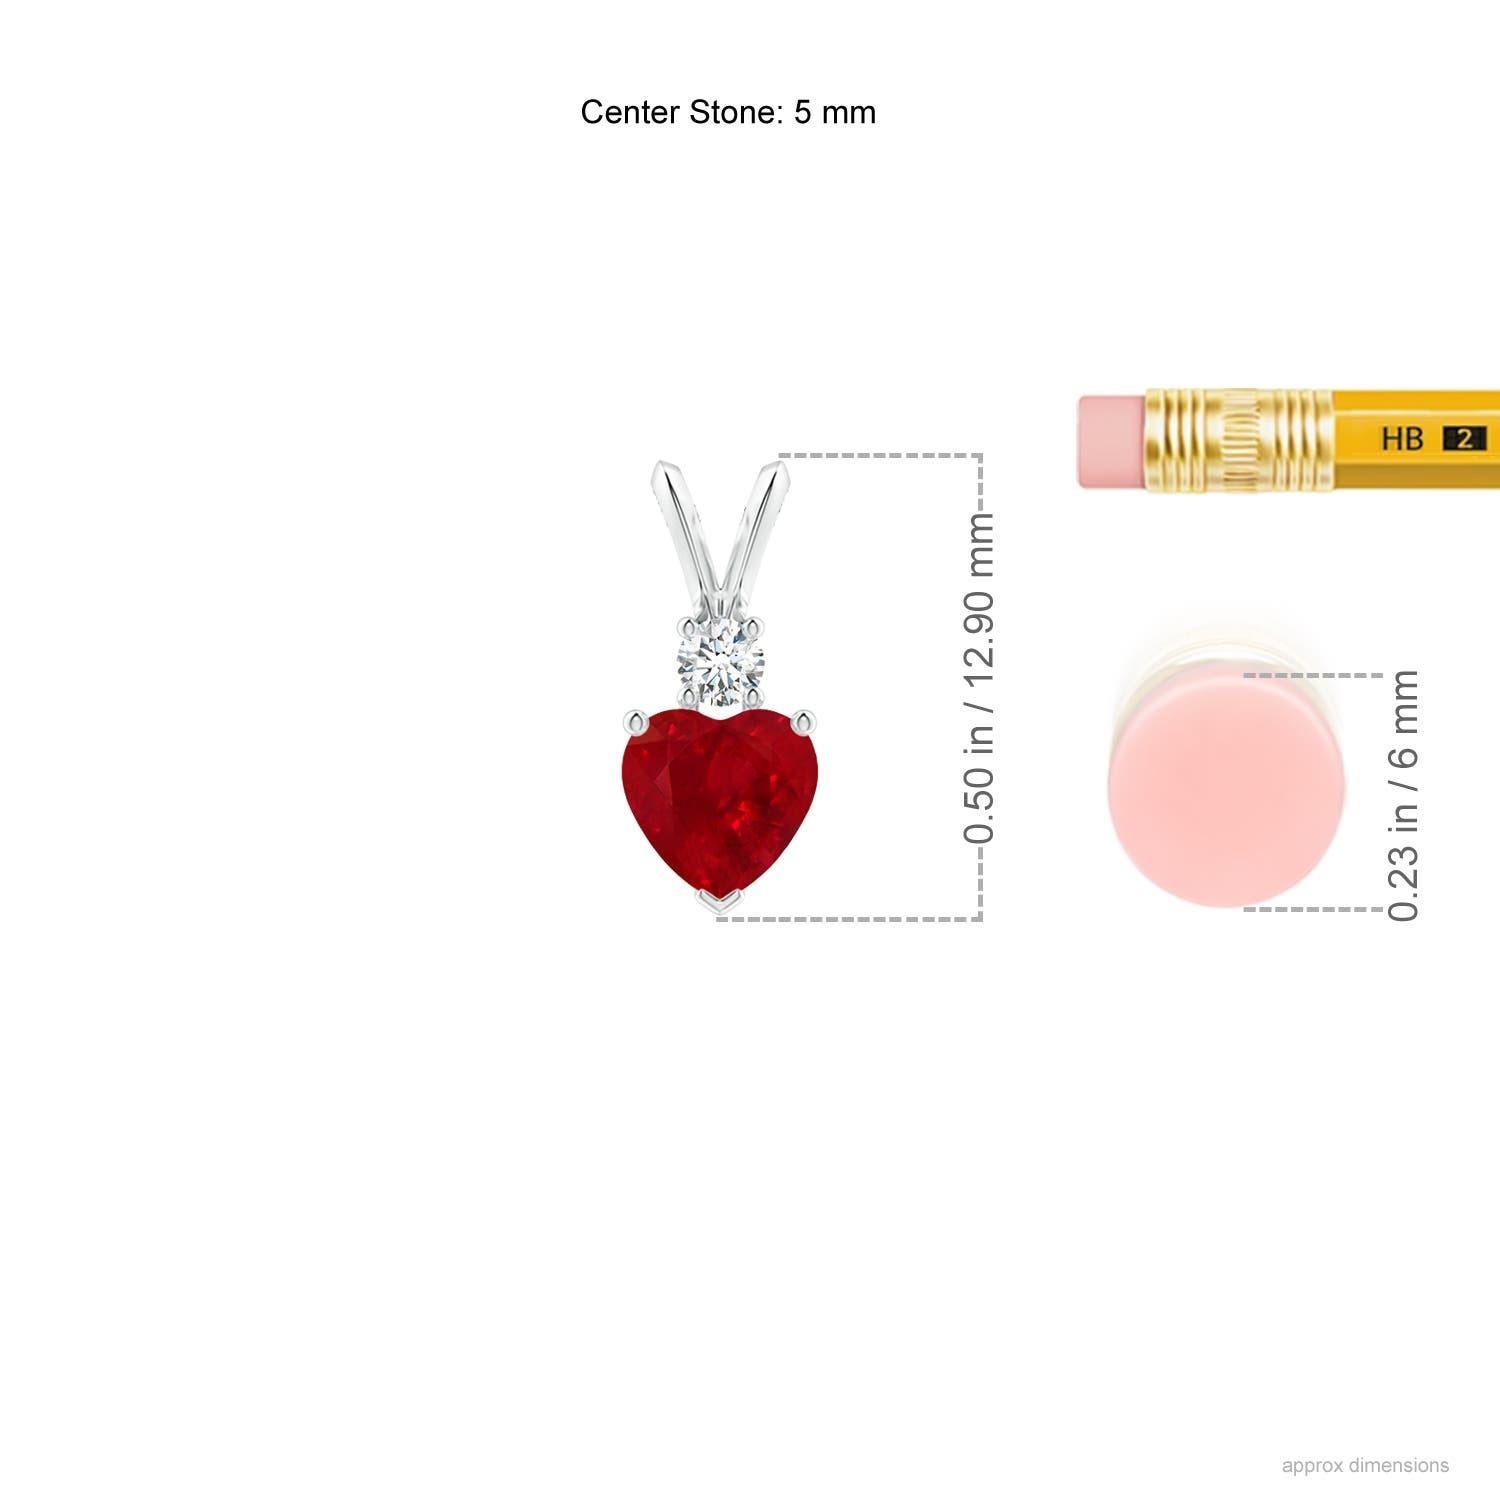 This heart-shaped ruby pendant in 14K white gold is a beautiful symbol of love. The bold red gem is topped with a glittering round diamond and linked to a rabbit ear bale.
Ruby is the birthstone for July and the traditional gemstone gift for the